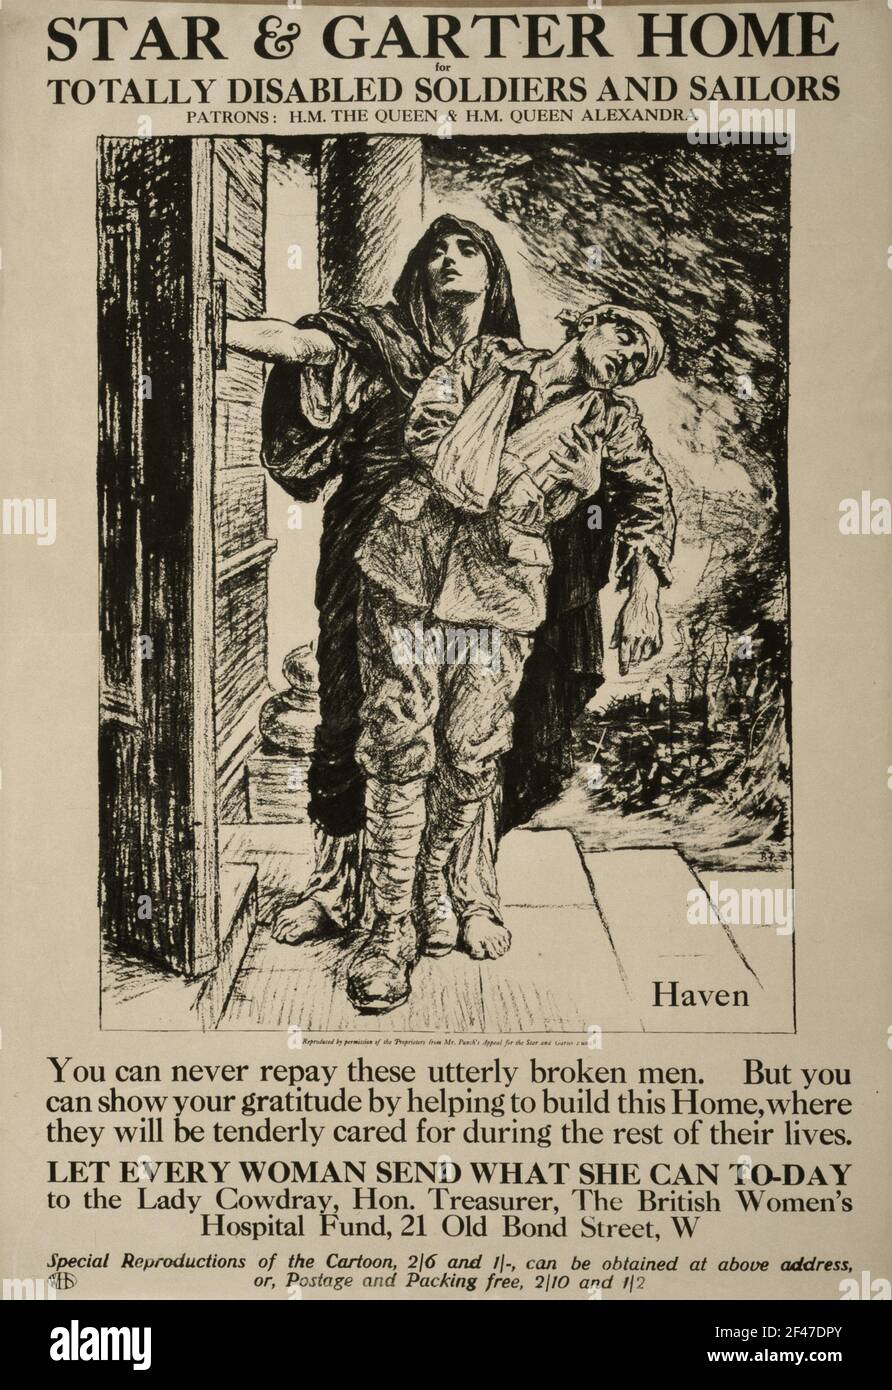 A first world war poster for the Star & Garter Home for the Totally Disabled Stock Photo